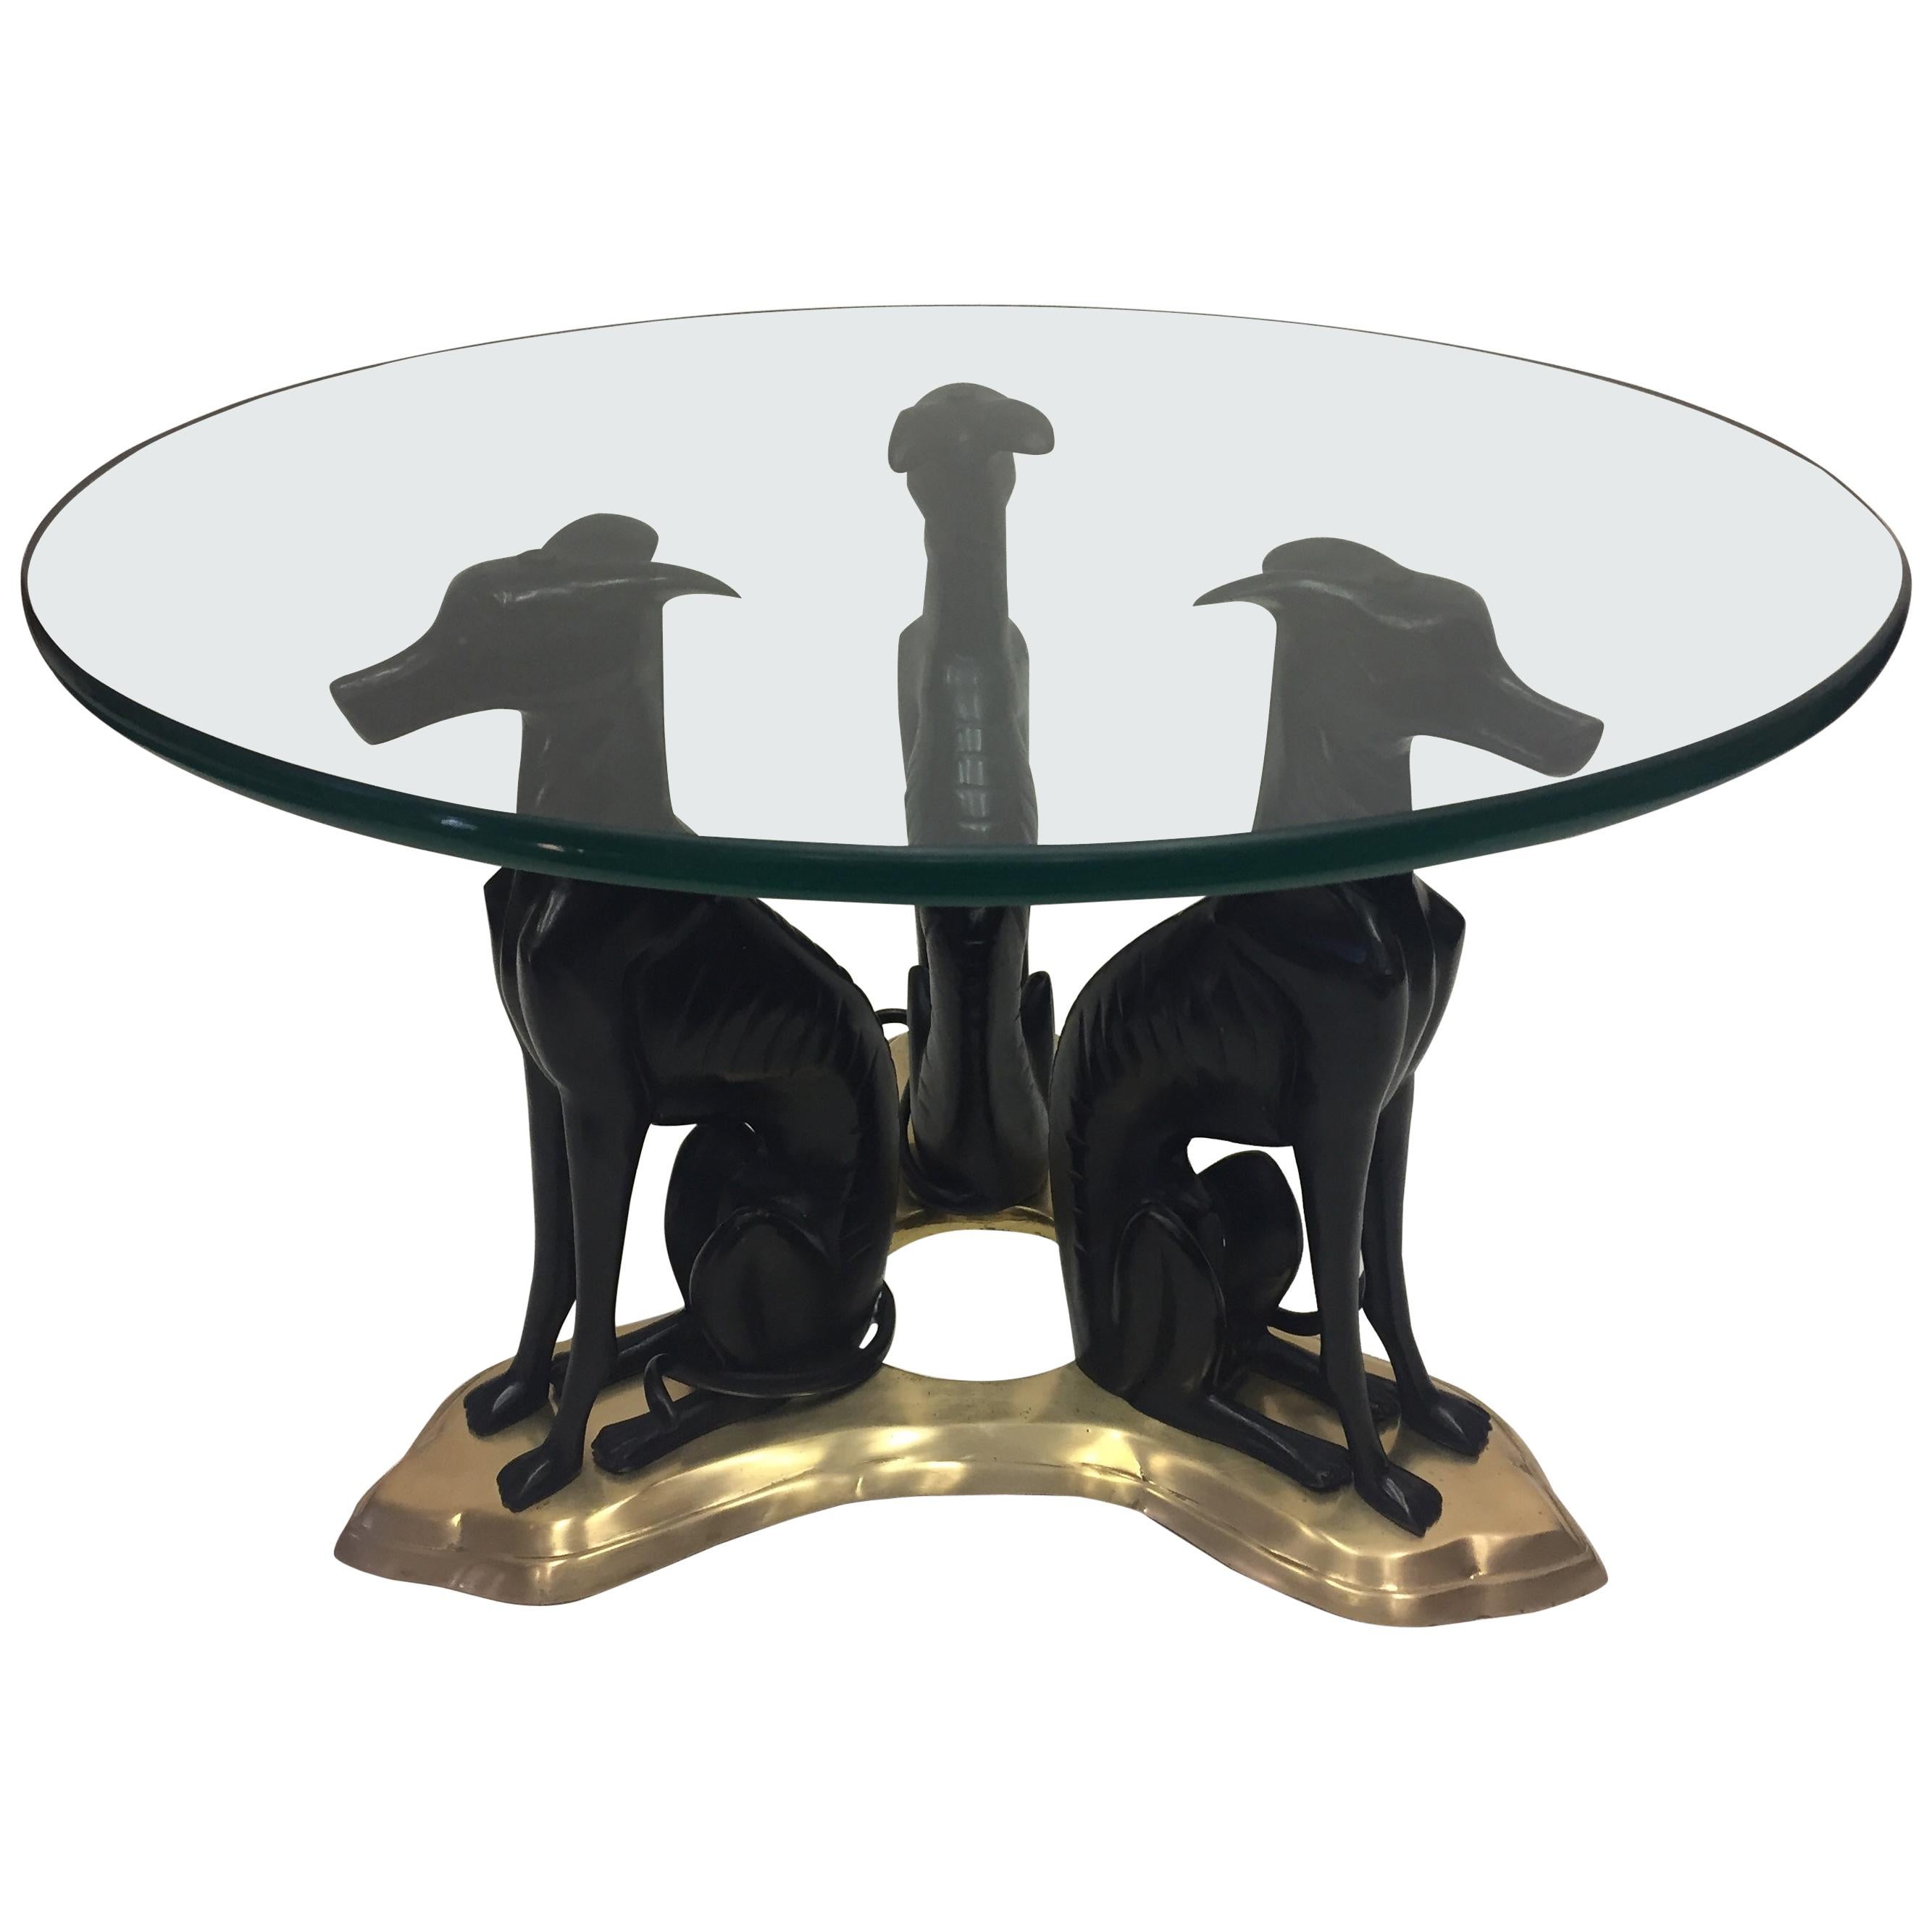 Show Stopper Patinated Bronze and Brass Whippet Motife Coffee Table